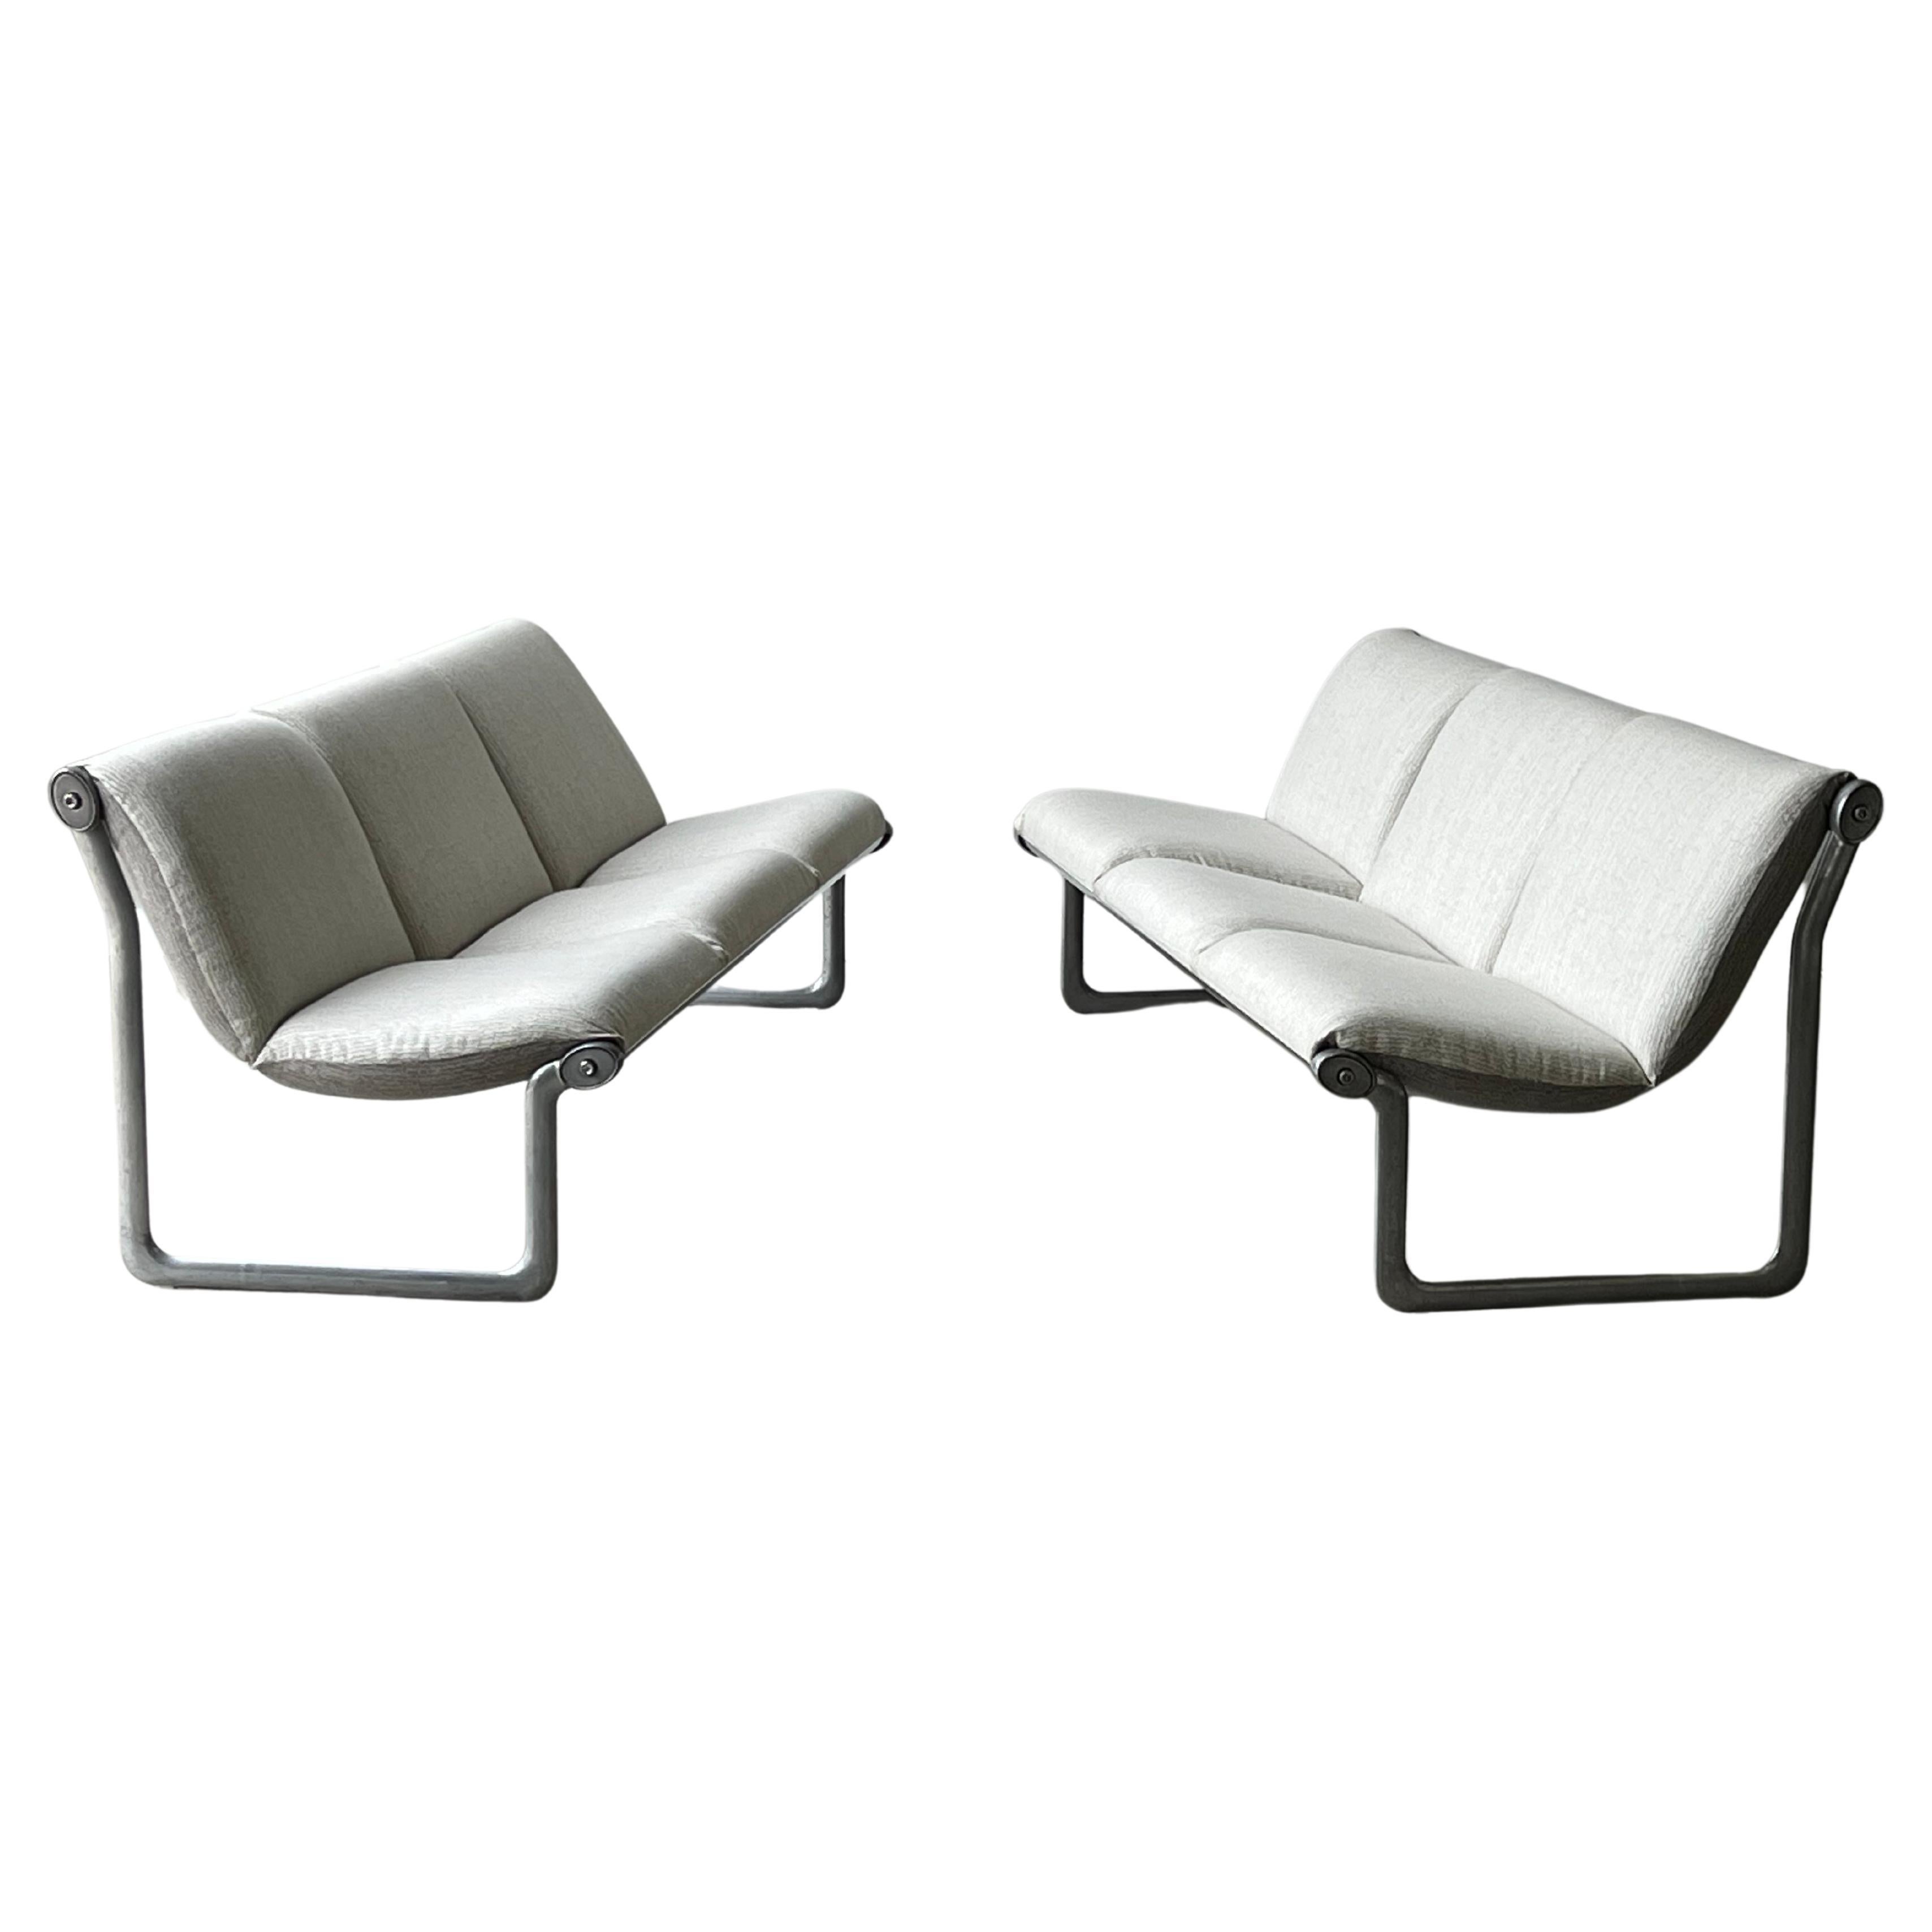 Vintage “Sling” Sofas by Bruce Hannah and Andrew Morrison for Knoll 